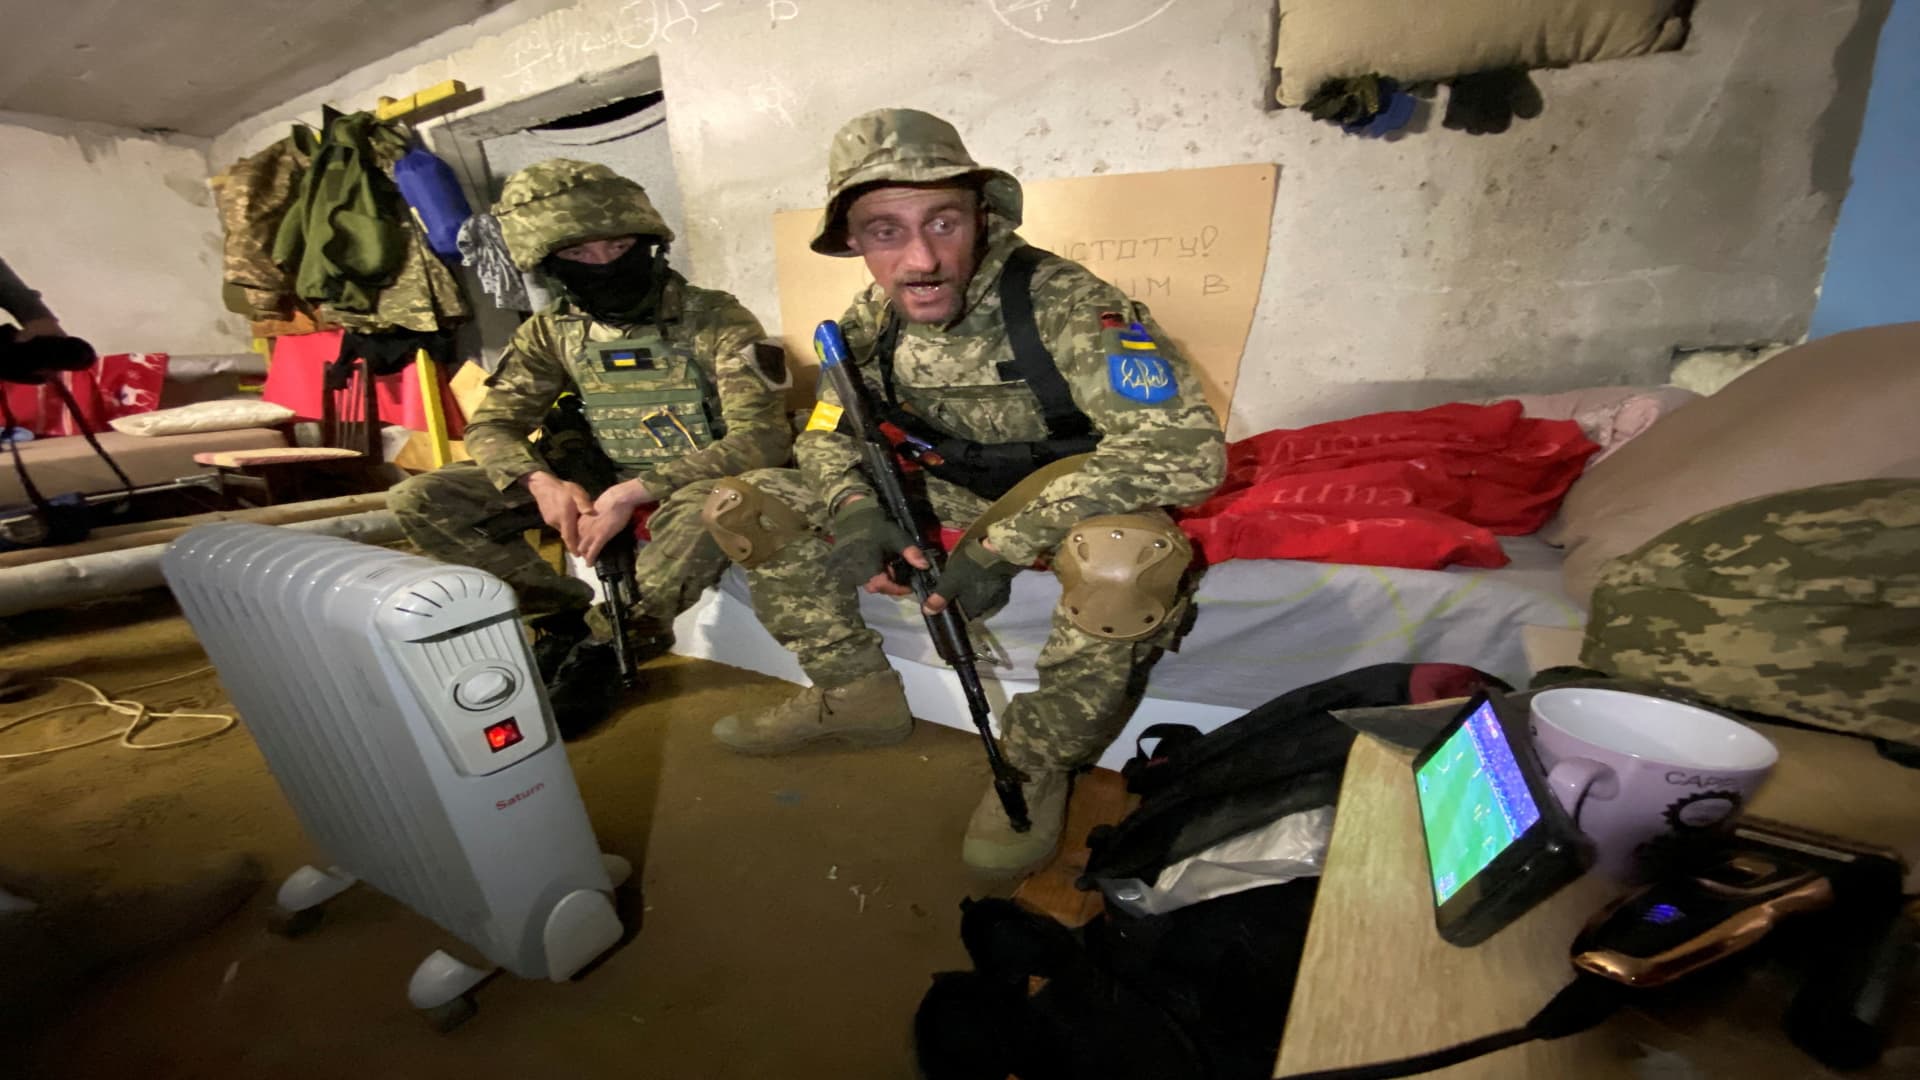 Members of the Ukrainian Territorial Defense Forces watch the FIFA World Cup 2022 qualification playoff semi-final soccer match between Scotland and Ukraine on a mobile phone in a shelter, as Russia's attack on Ukraine continues, in Kharkiv, Ukraine June 1, 2022. Picture taken June 1, 2022. 